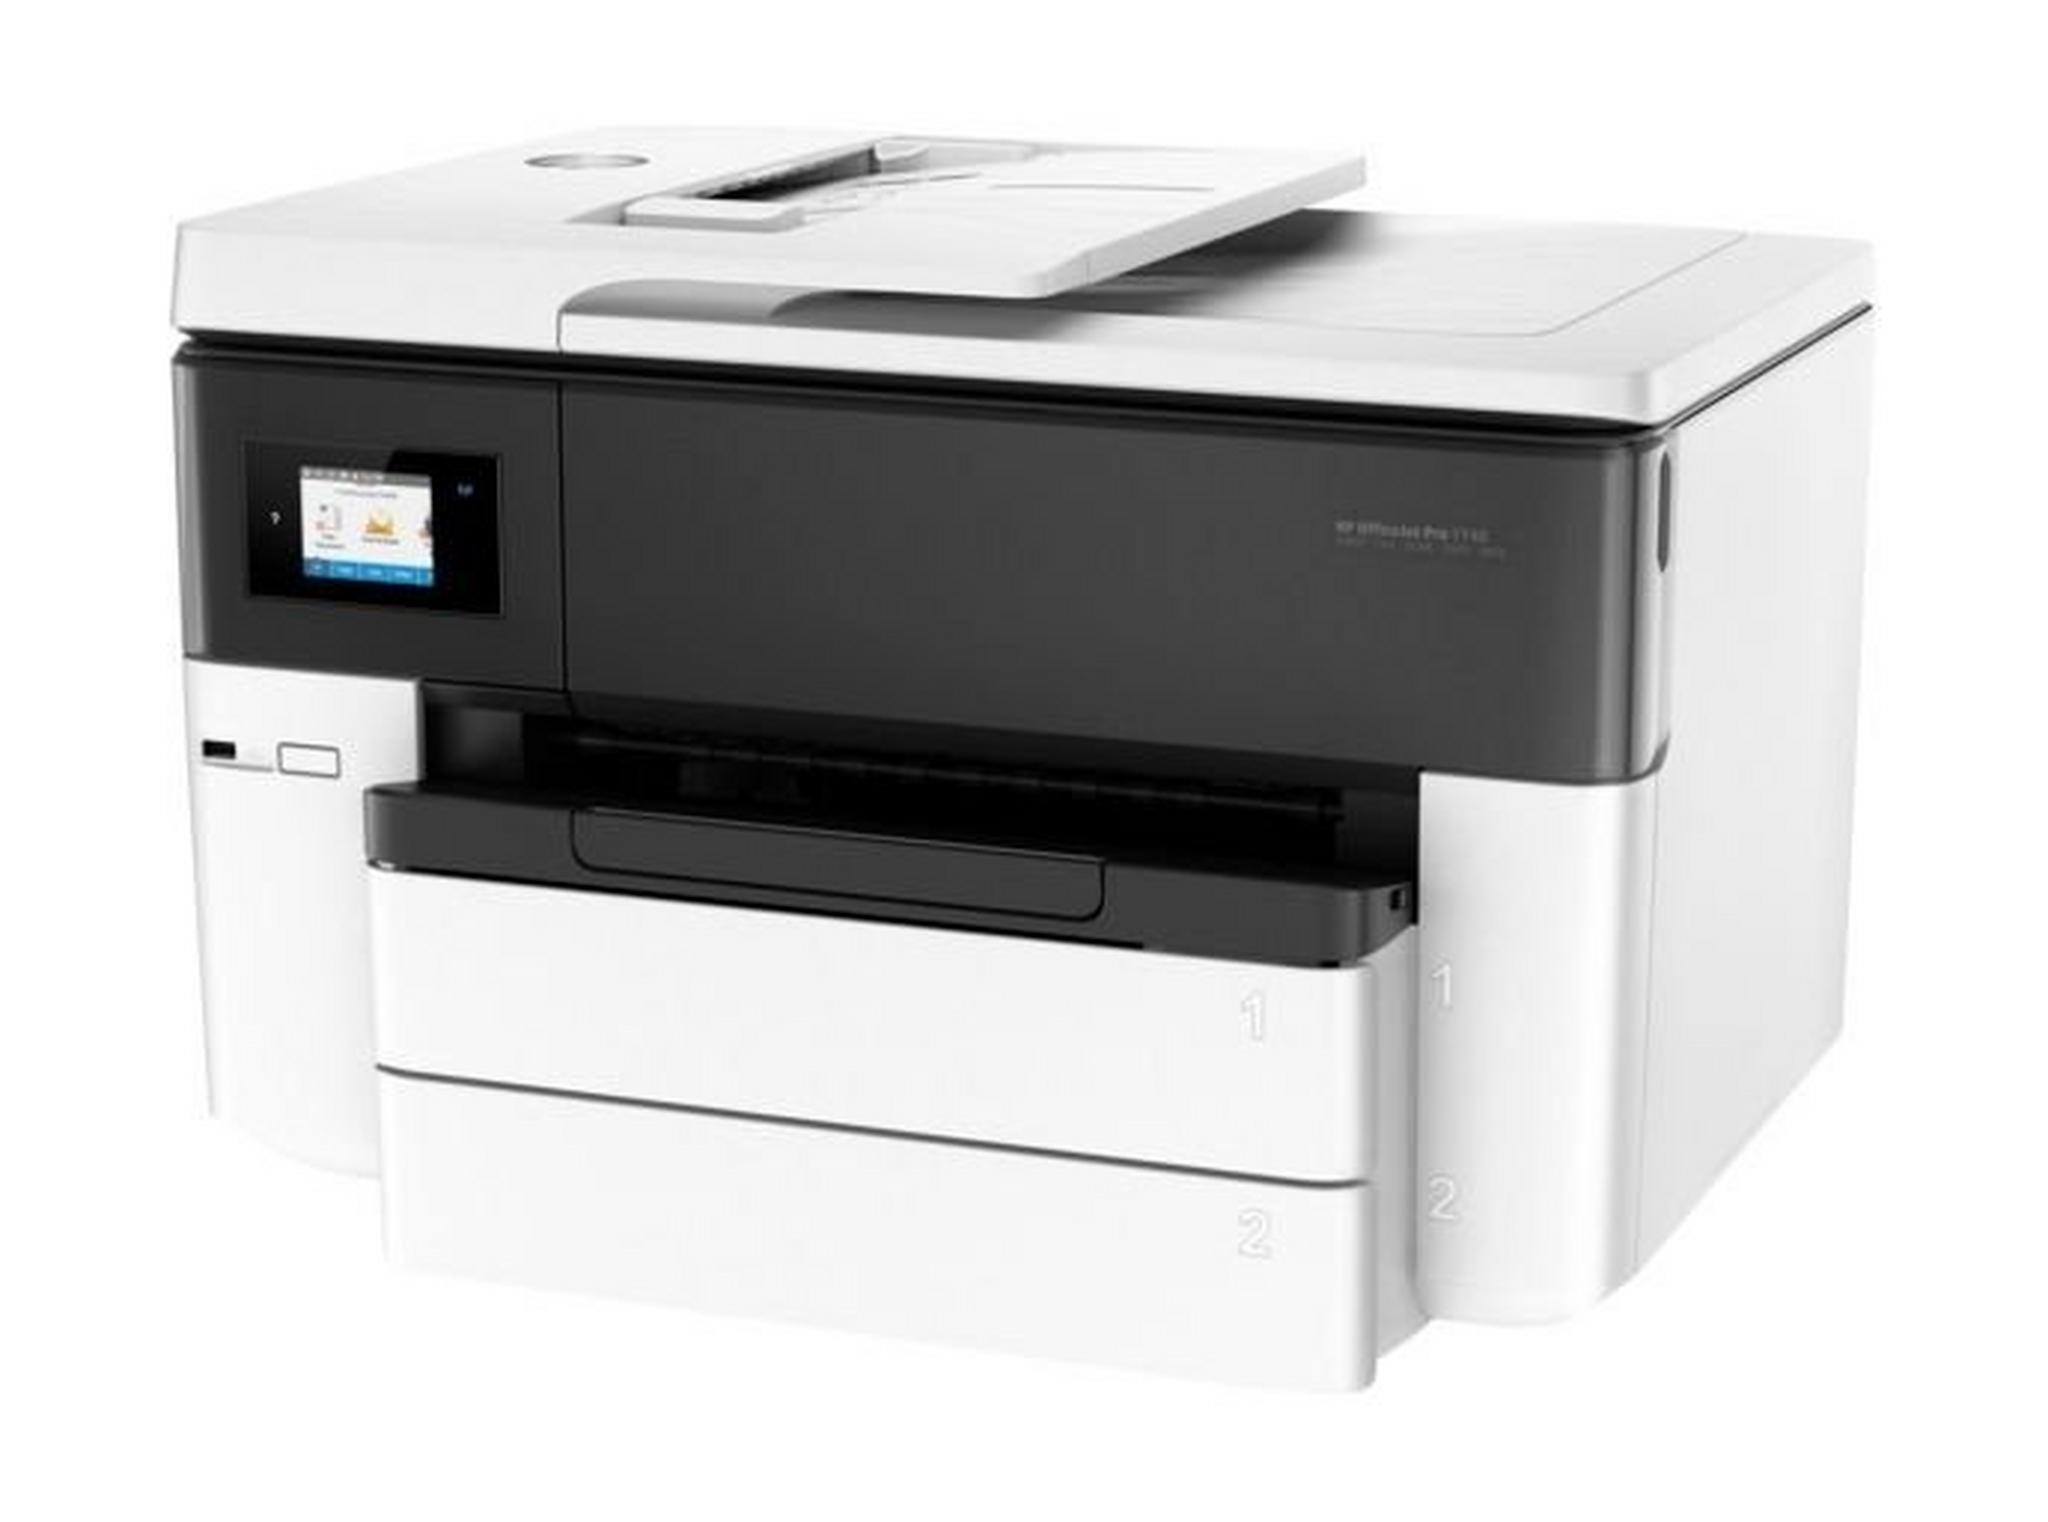 HP OfficeJet Pro 7740 All-in-One Printer - G5J38A